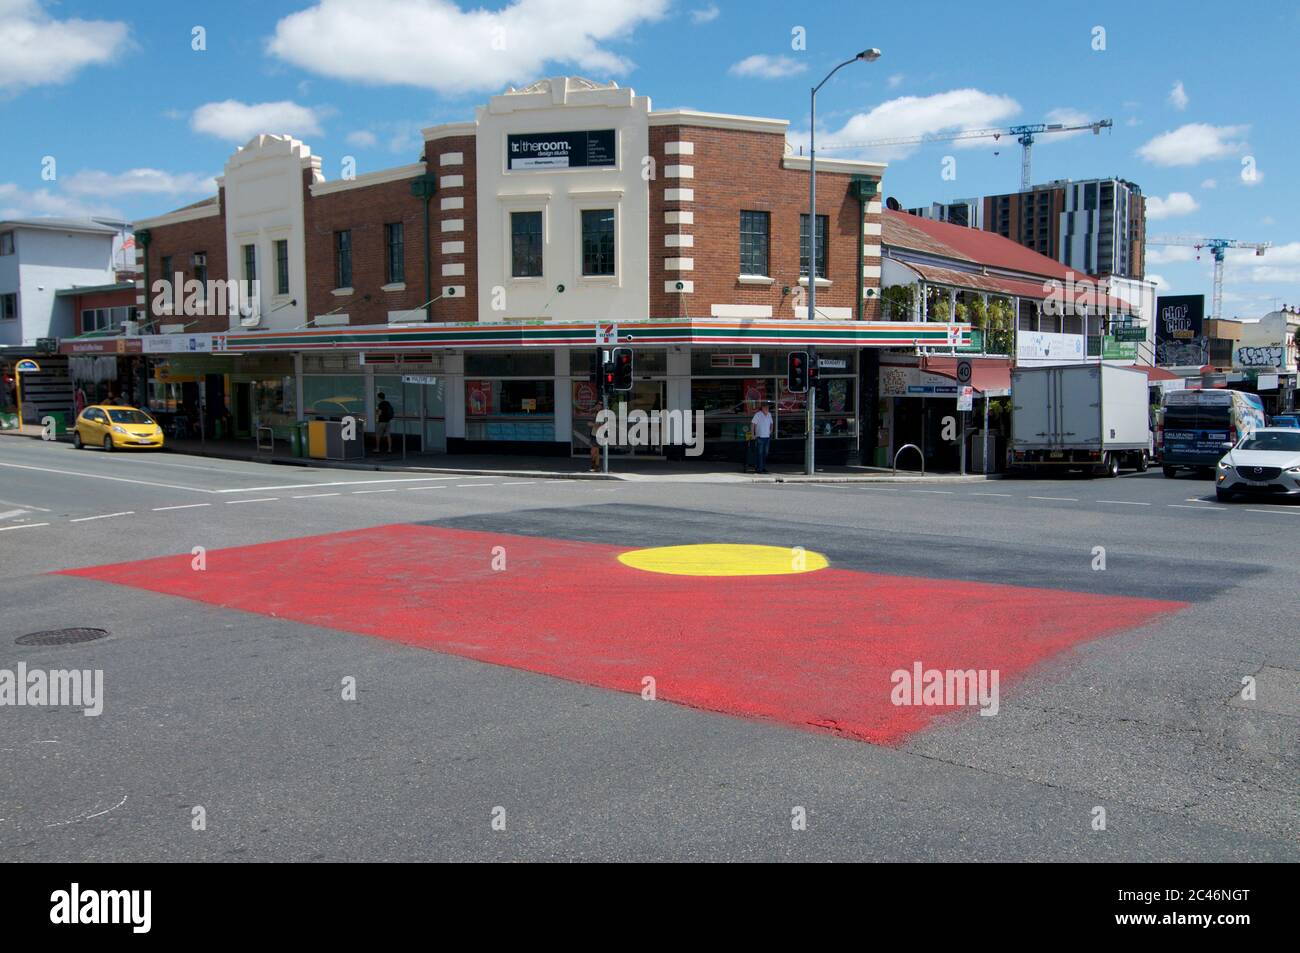 Brisbane, Queensland, Australia - 29th January 2020 : Big aboriginal flag painted on the pavement on intersection of Vulture St. and Boundary St. in W Stock Photo